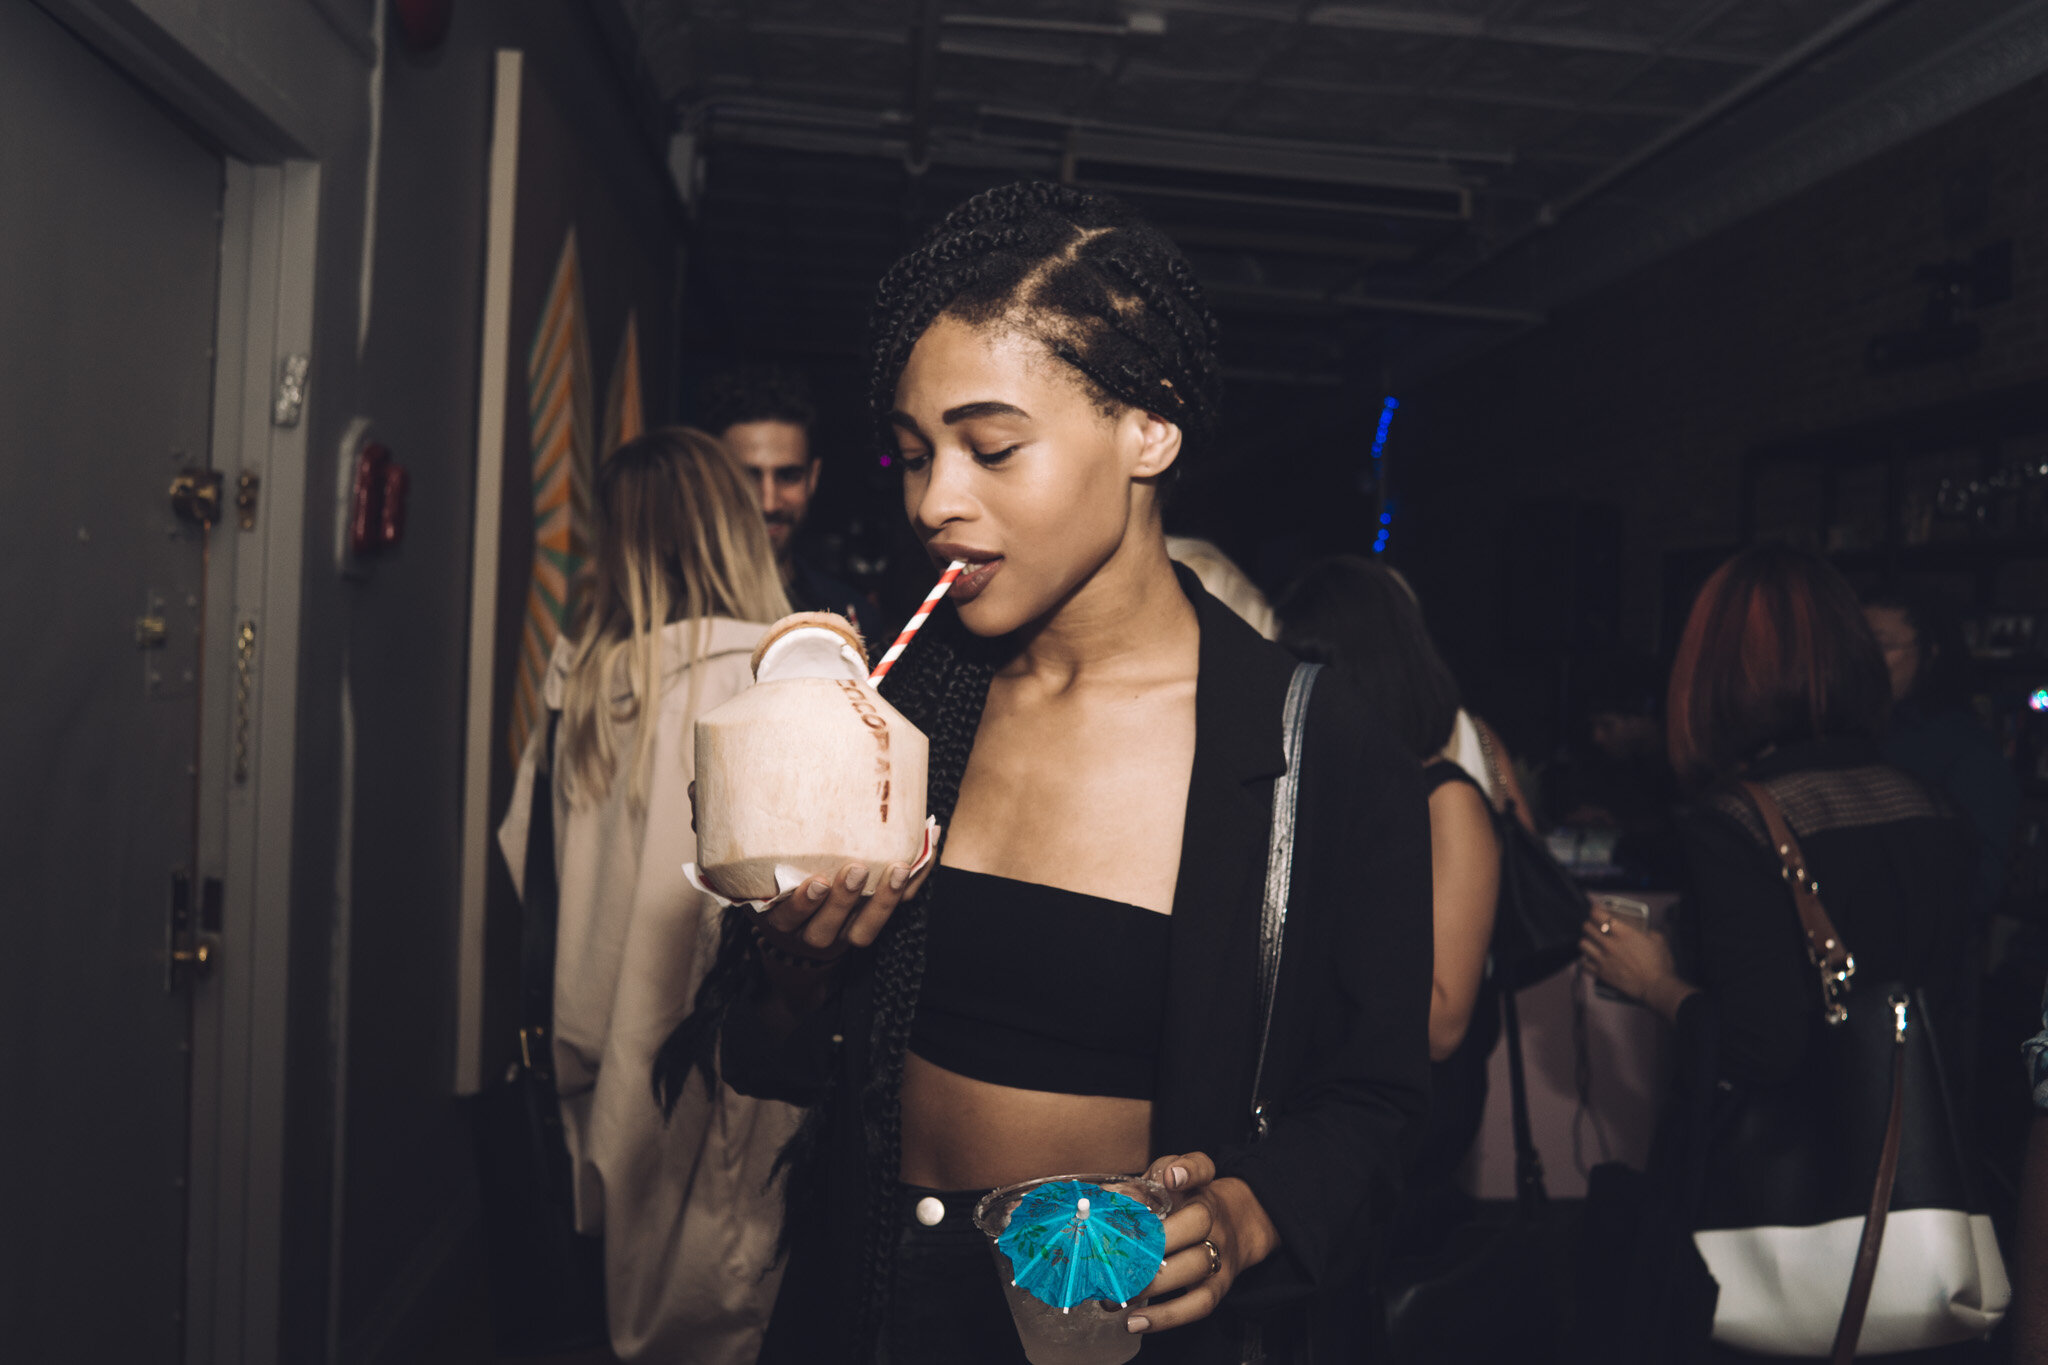 nyfw_afterparty-09534@2x.jpg